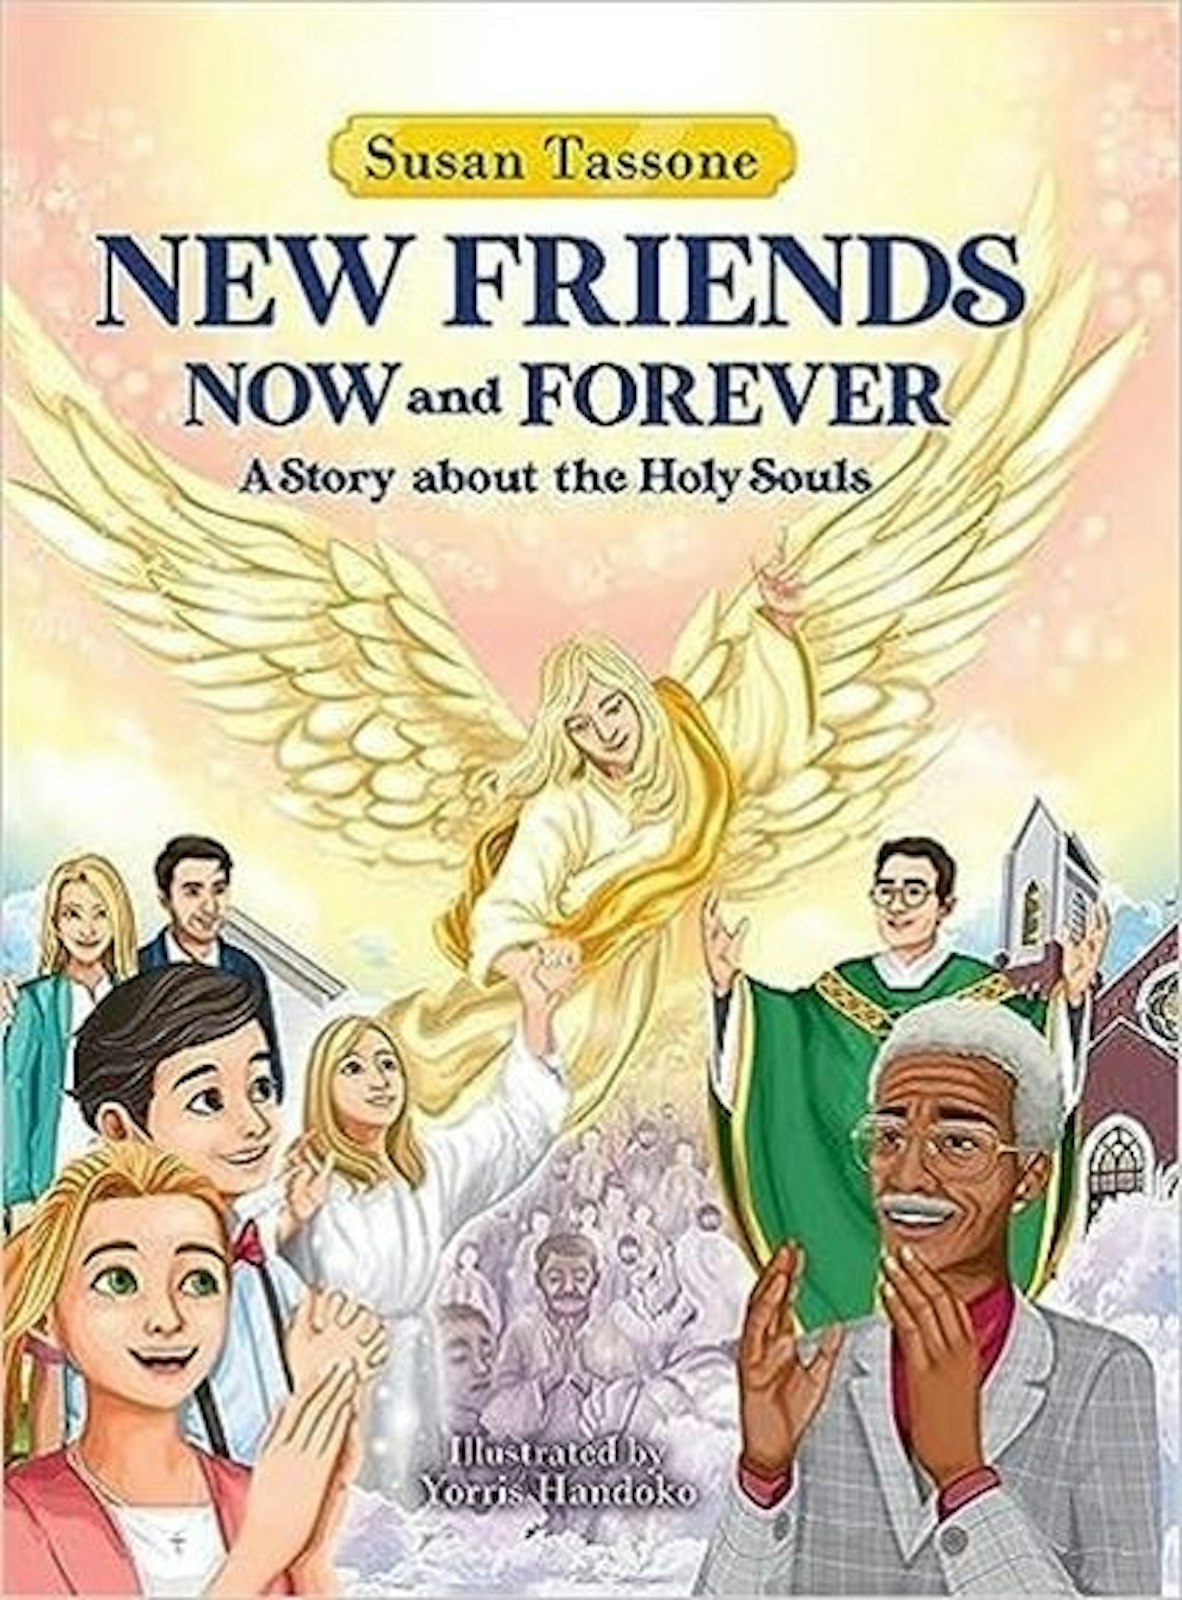 At the event, Tassone will debut her first-ever children's book about Purgatory, "New Friends — Now and Forever."